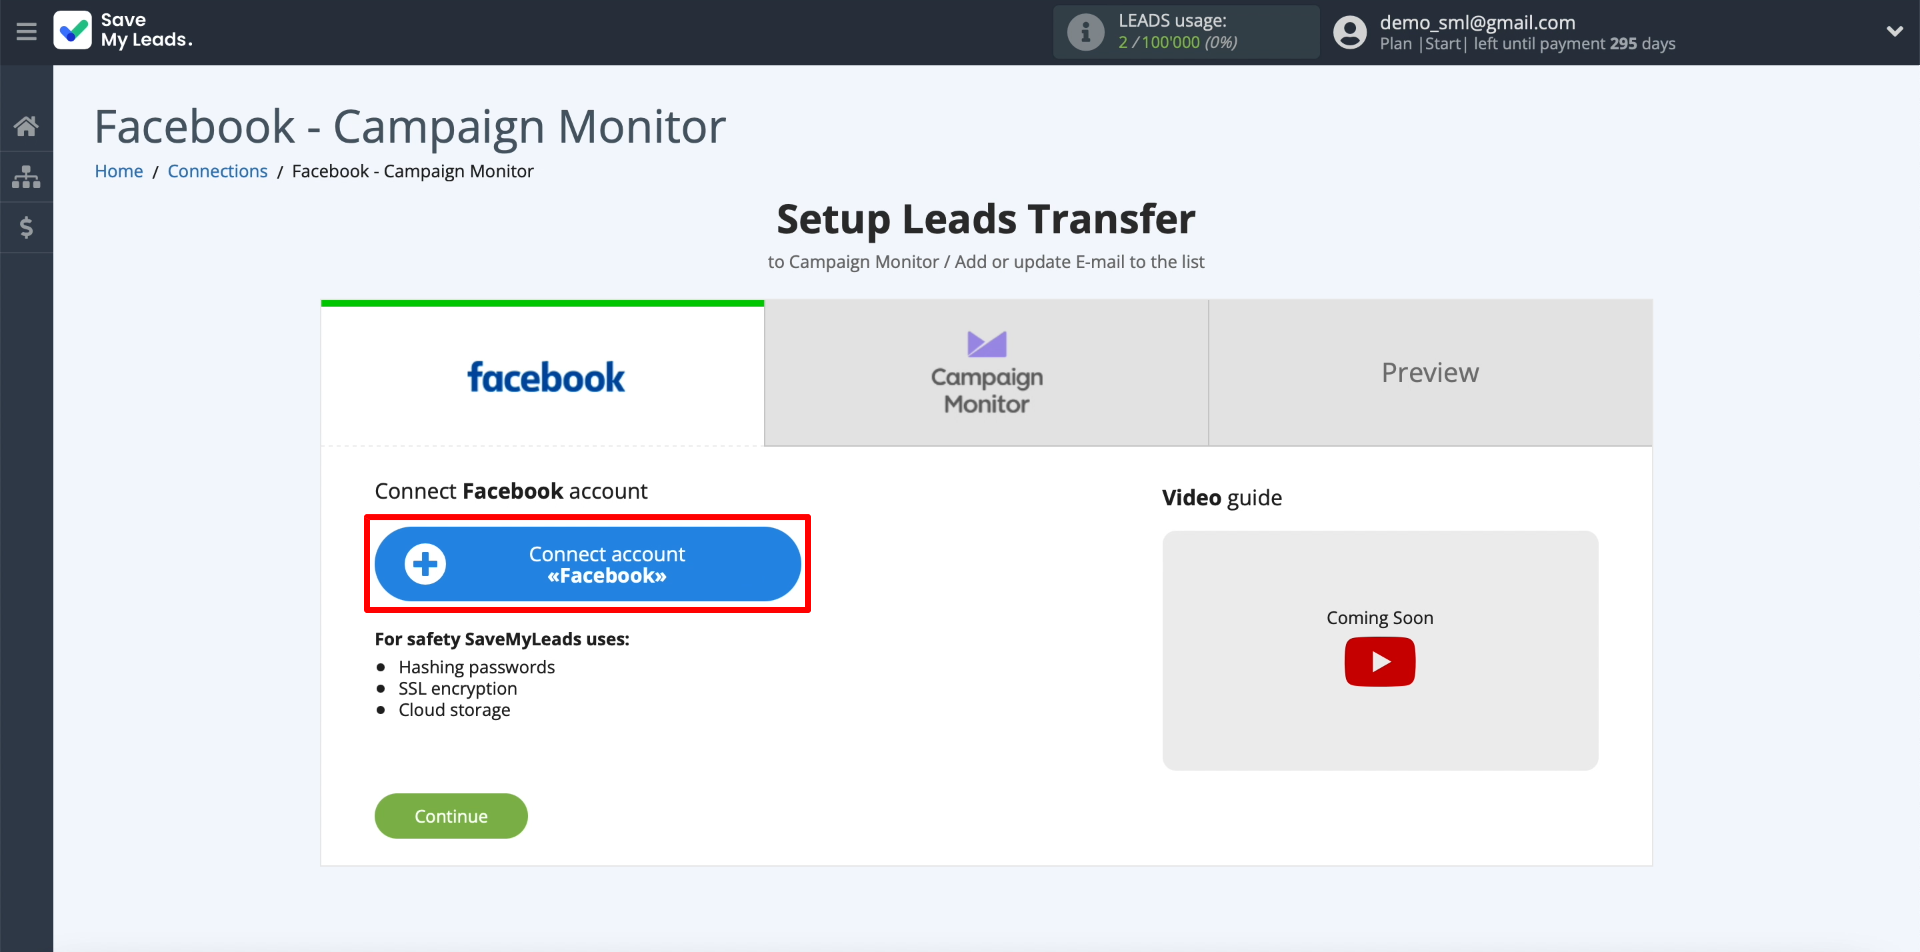 Facebook and Campaign Monitor integration | Connect Facebook